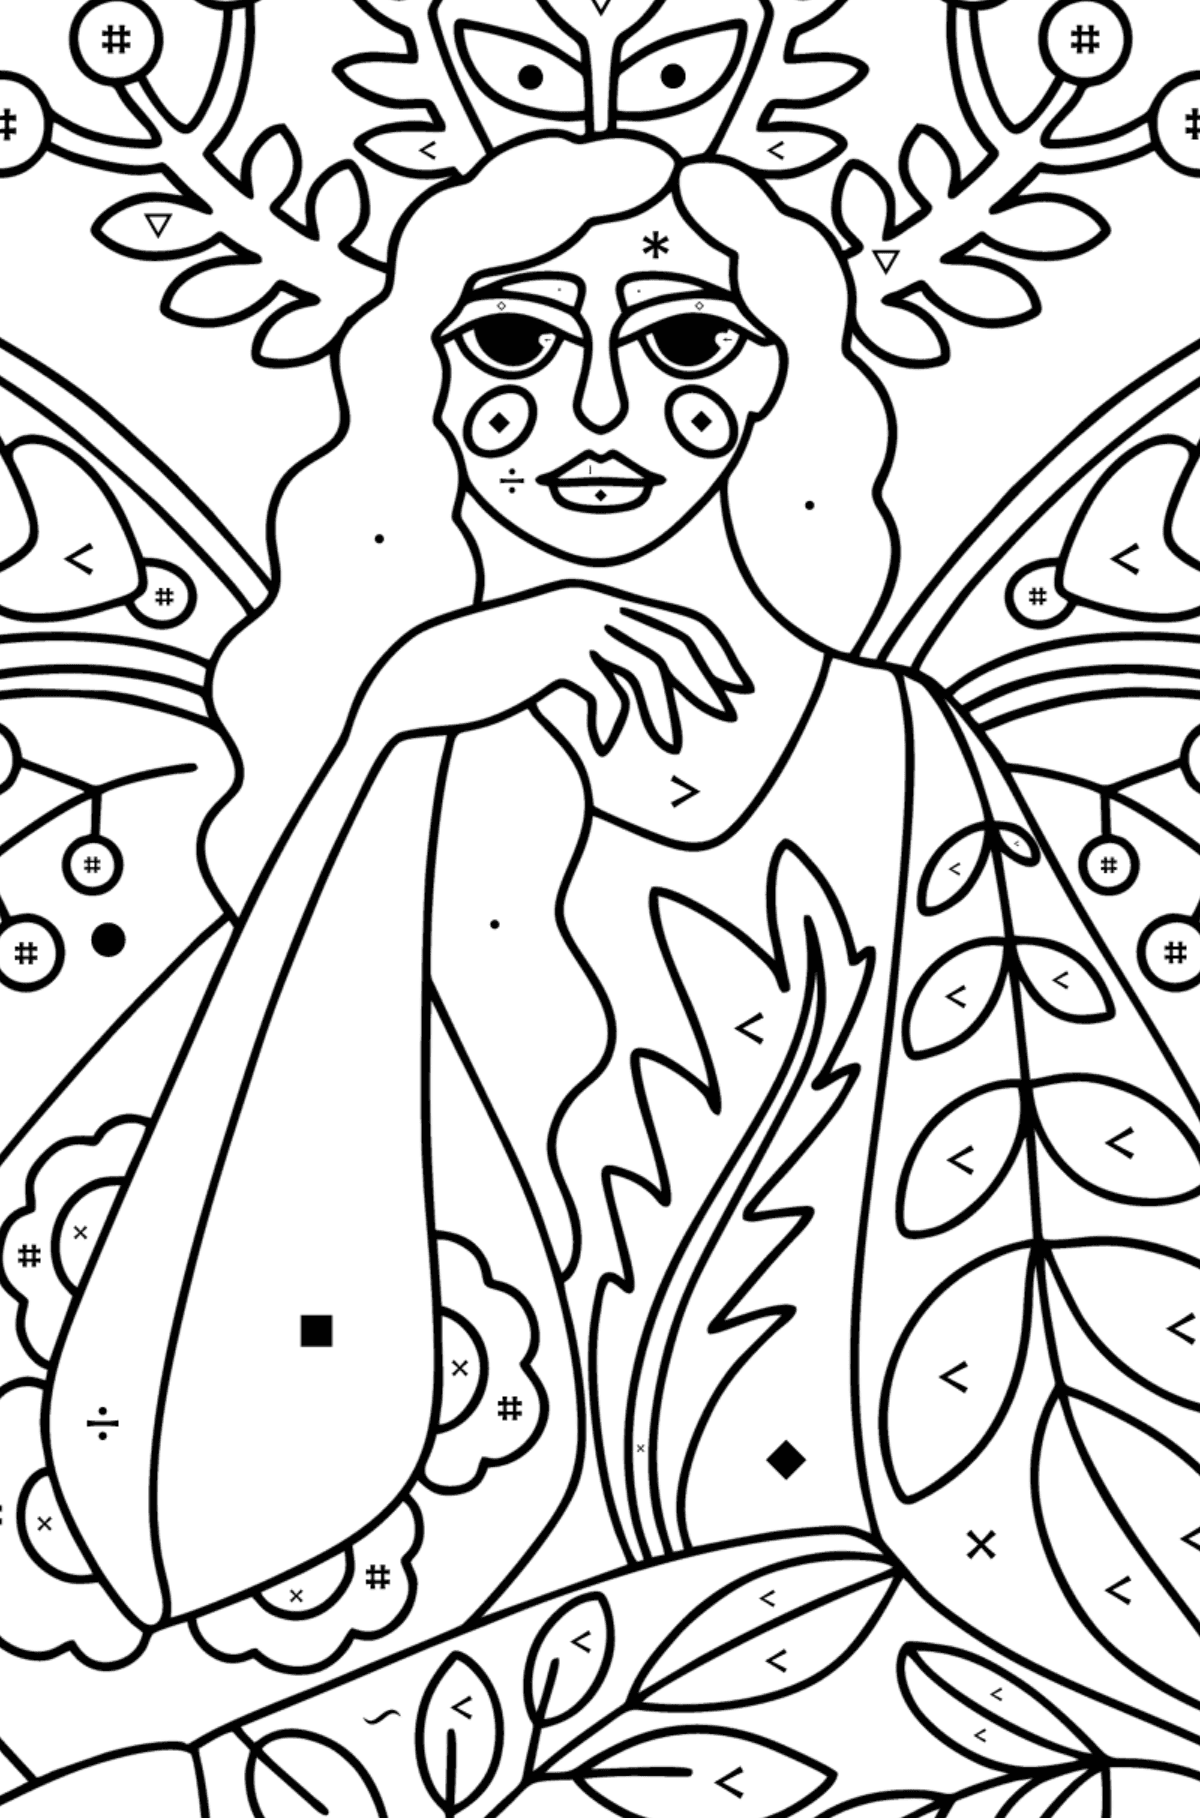 Fairy Tattoo (difficult) coloring page - Coloring by Symbols for Kids